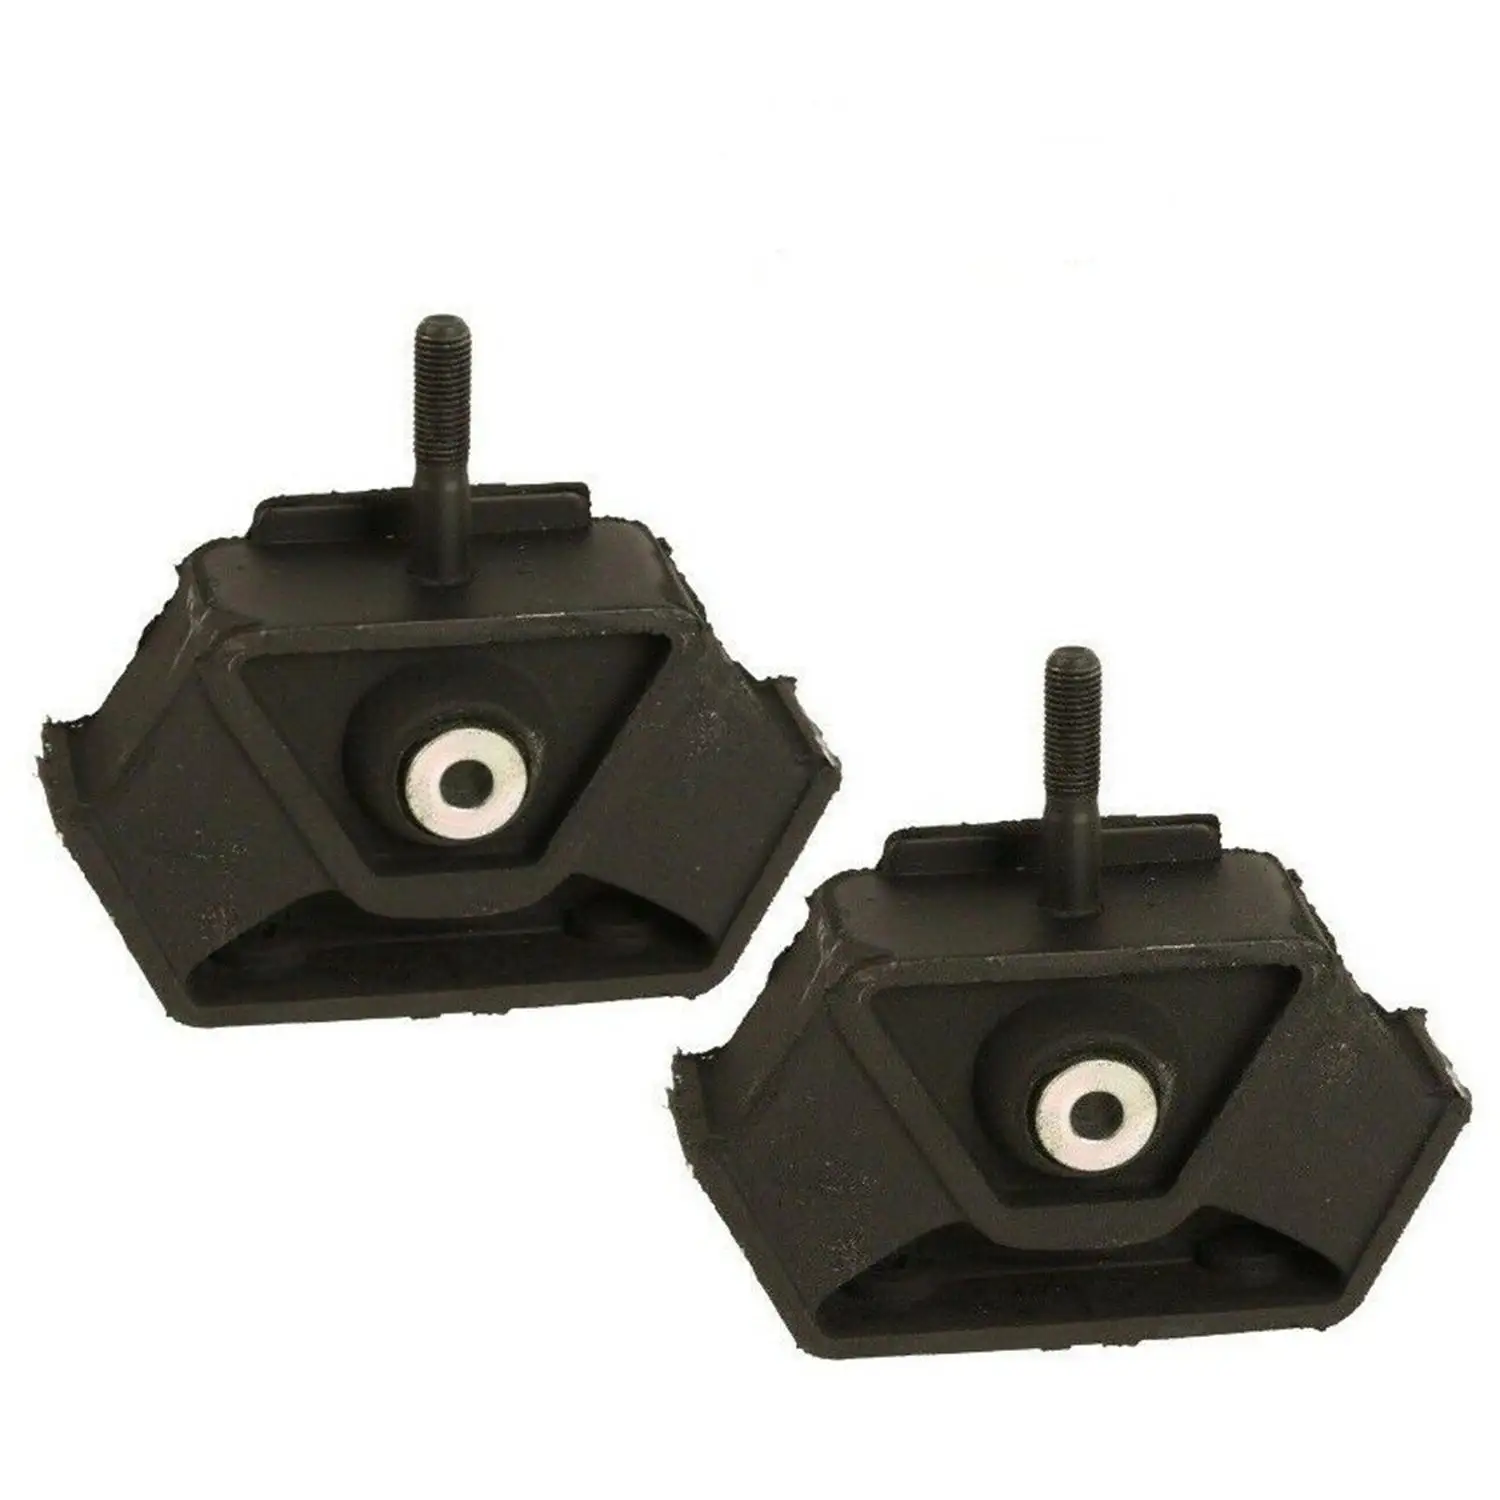 

2Pcs Pair Set of Left & Right Engine Mount 463.246 463.271 G550 463.237 460-240-70-18 for Mercedes W463 G55 AMG G550